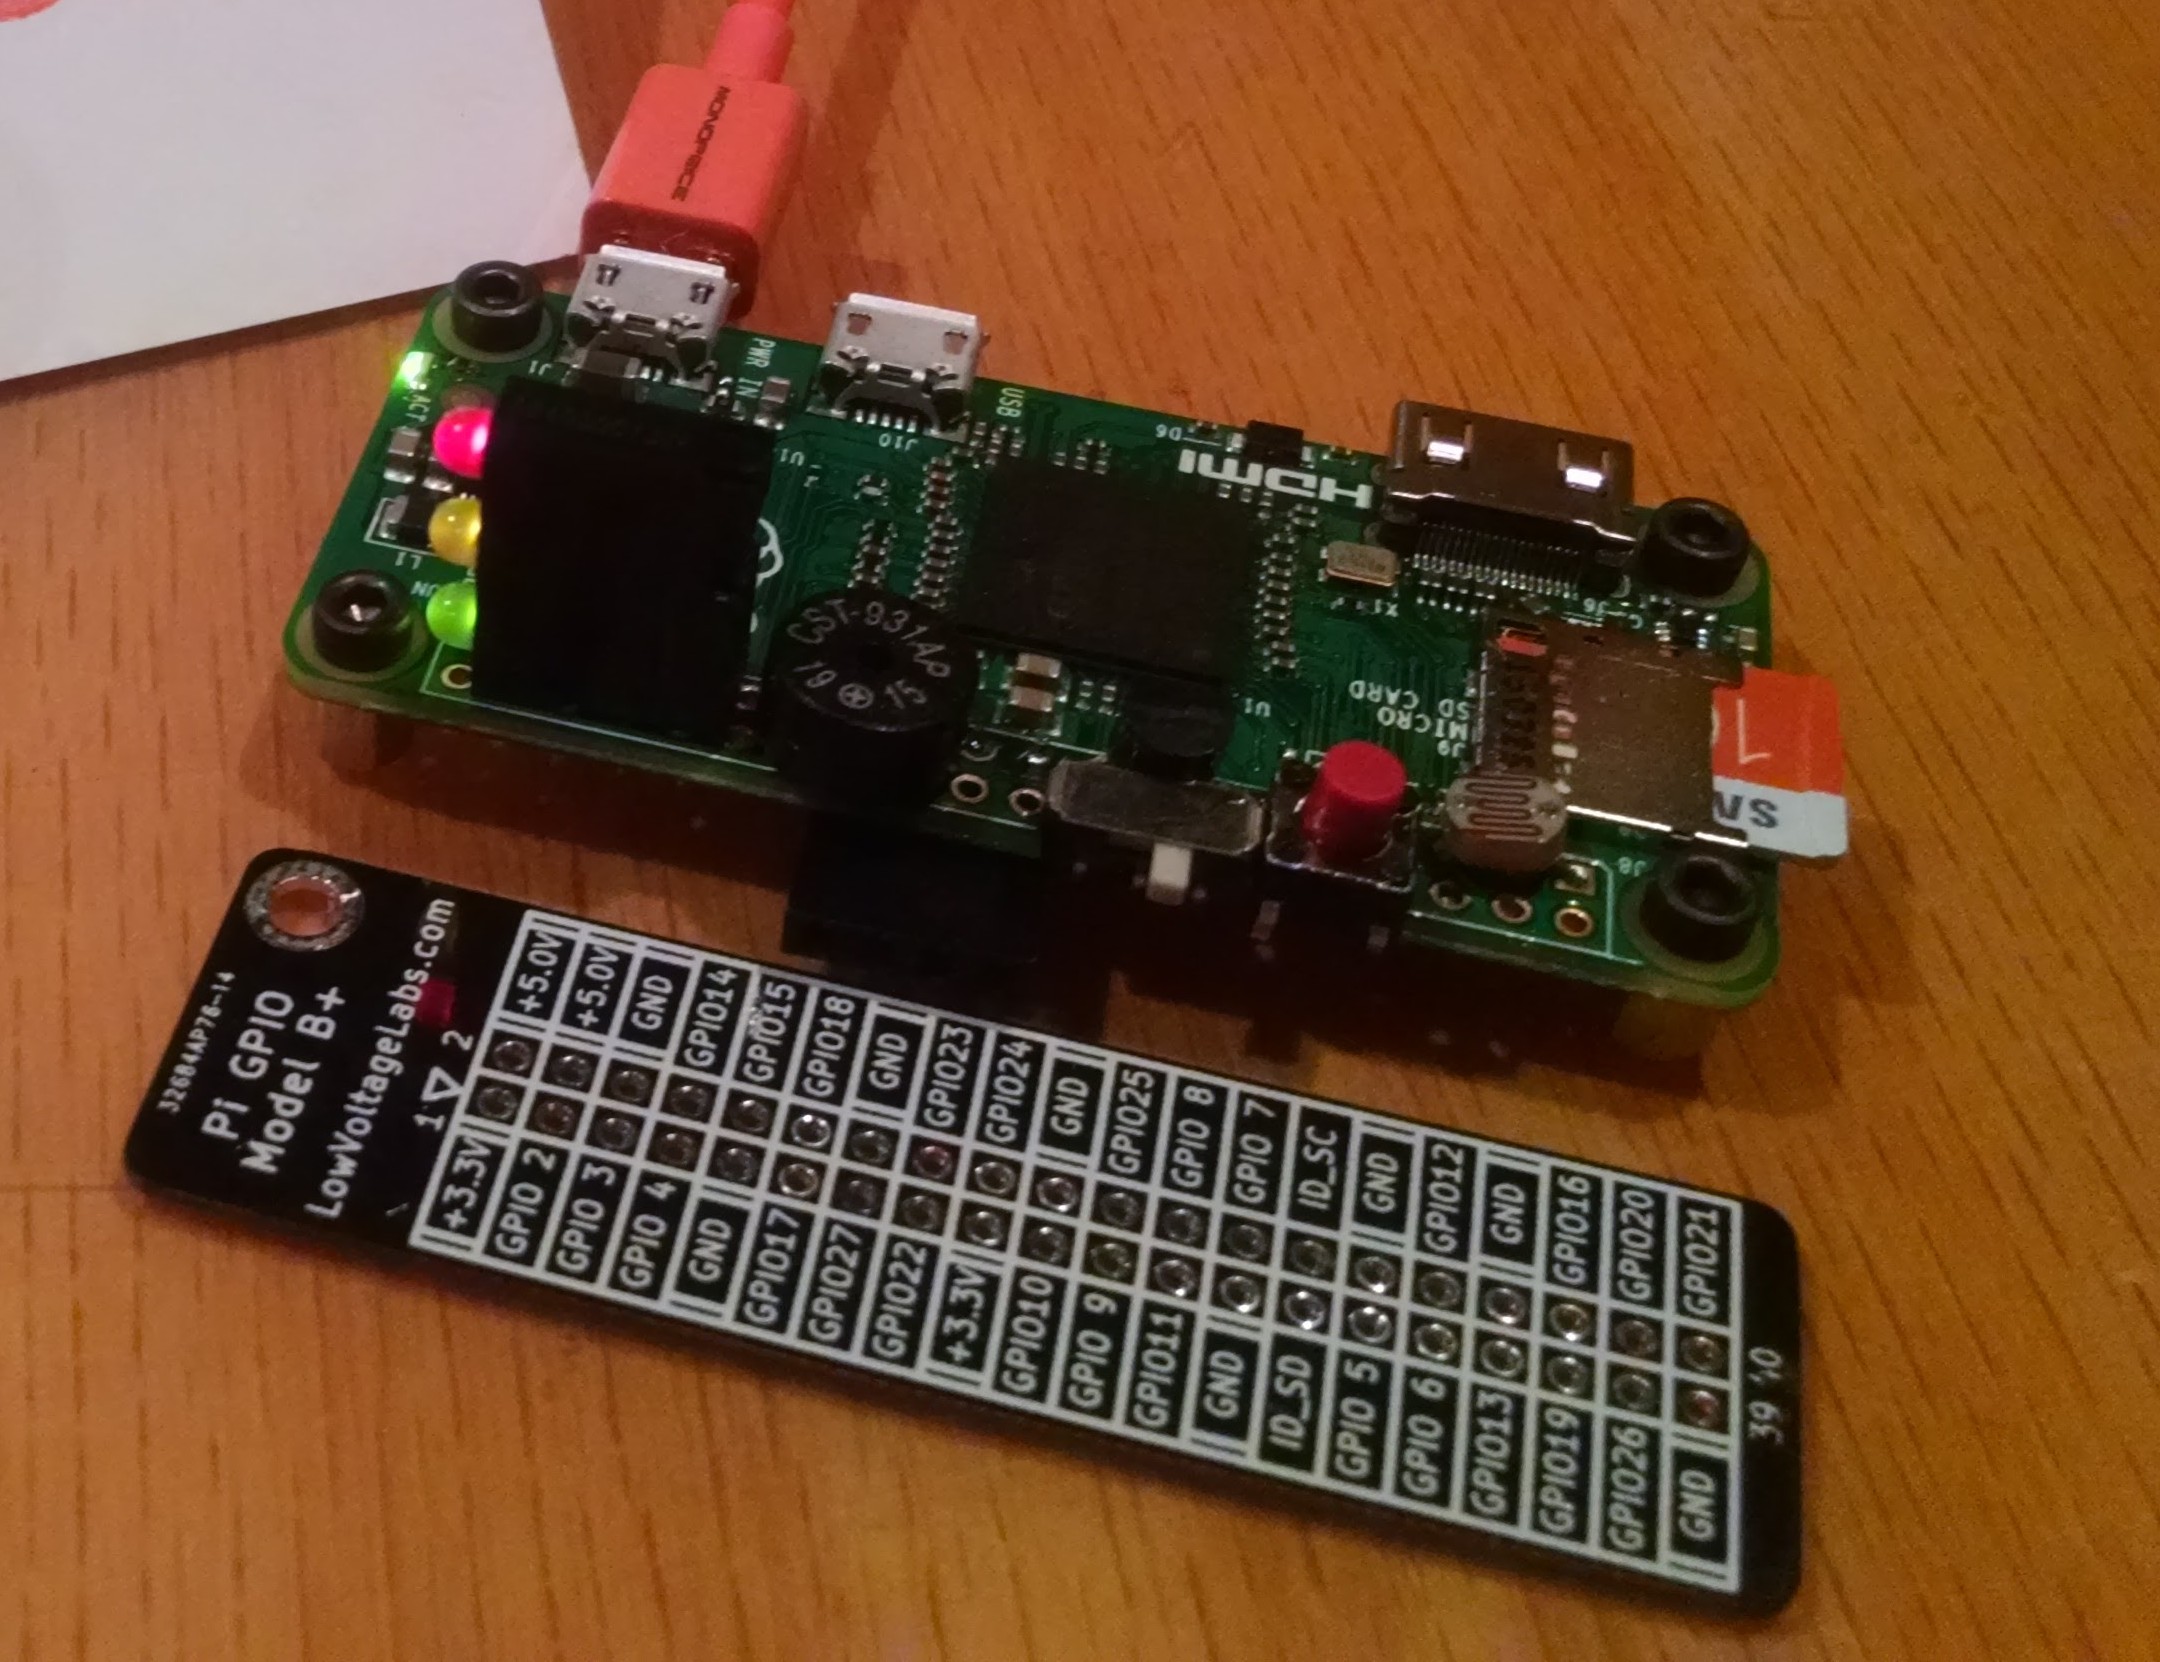 Learn to program hardware with a $5 Raspberry Pi Zero and $8 in parts